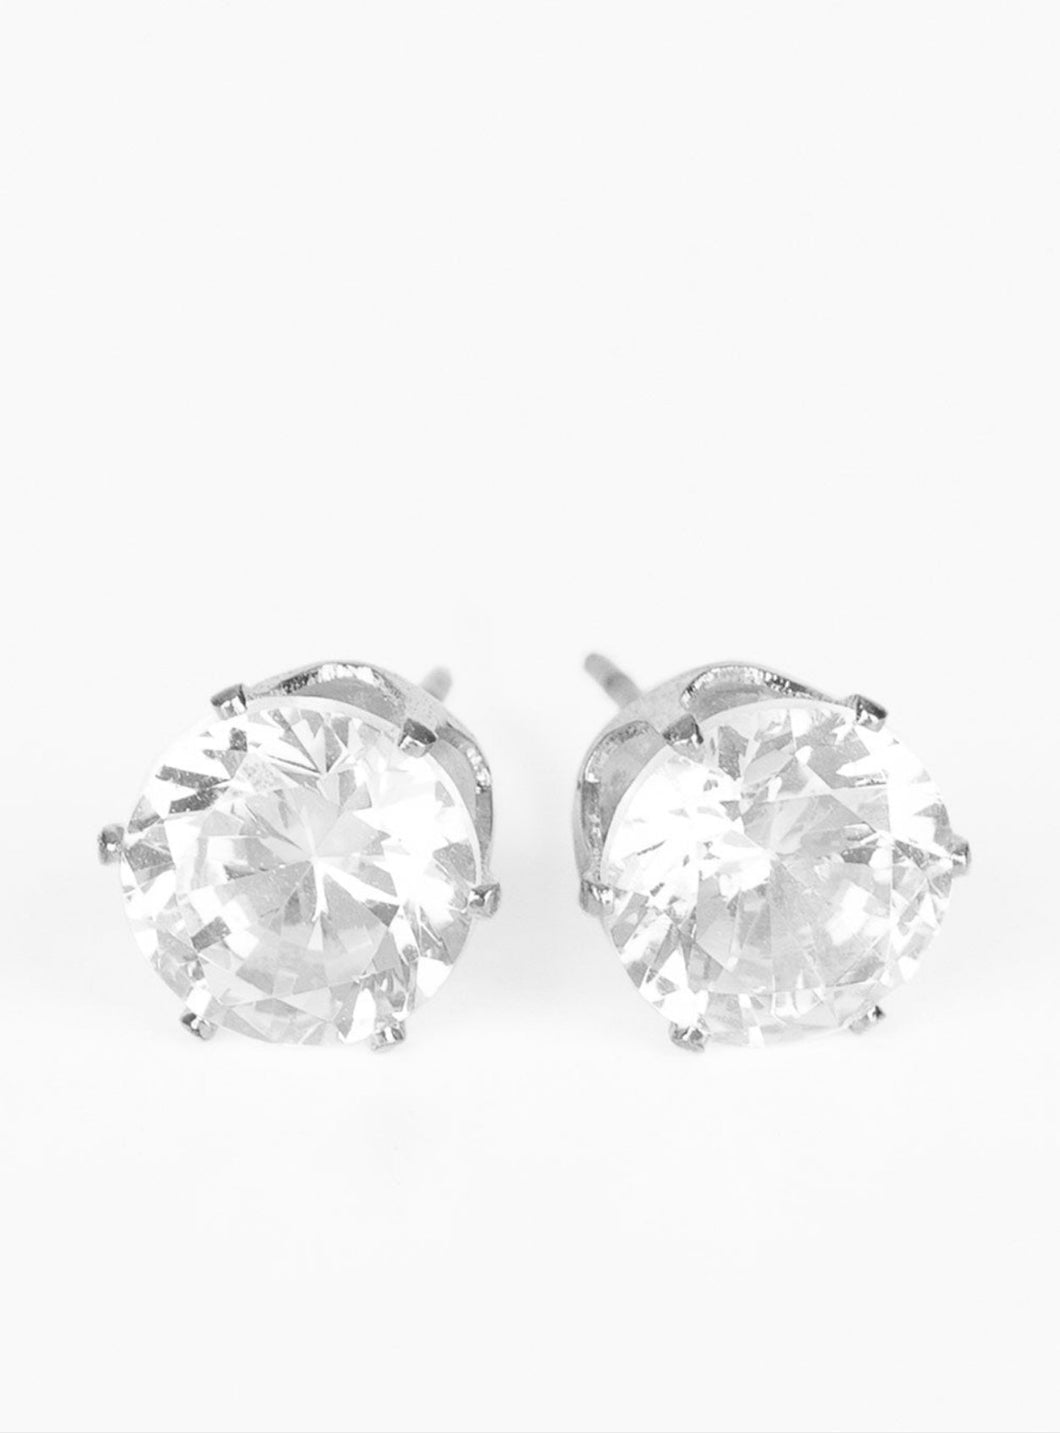 Just In TIMELESS Silver and Bling Stud Earrings